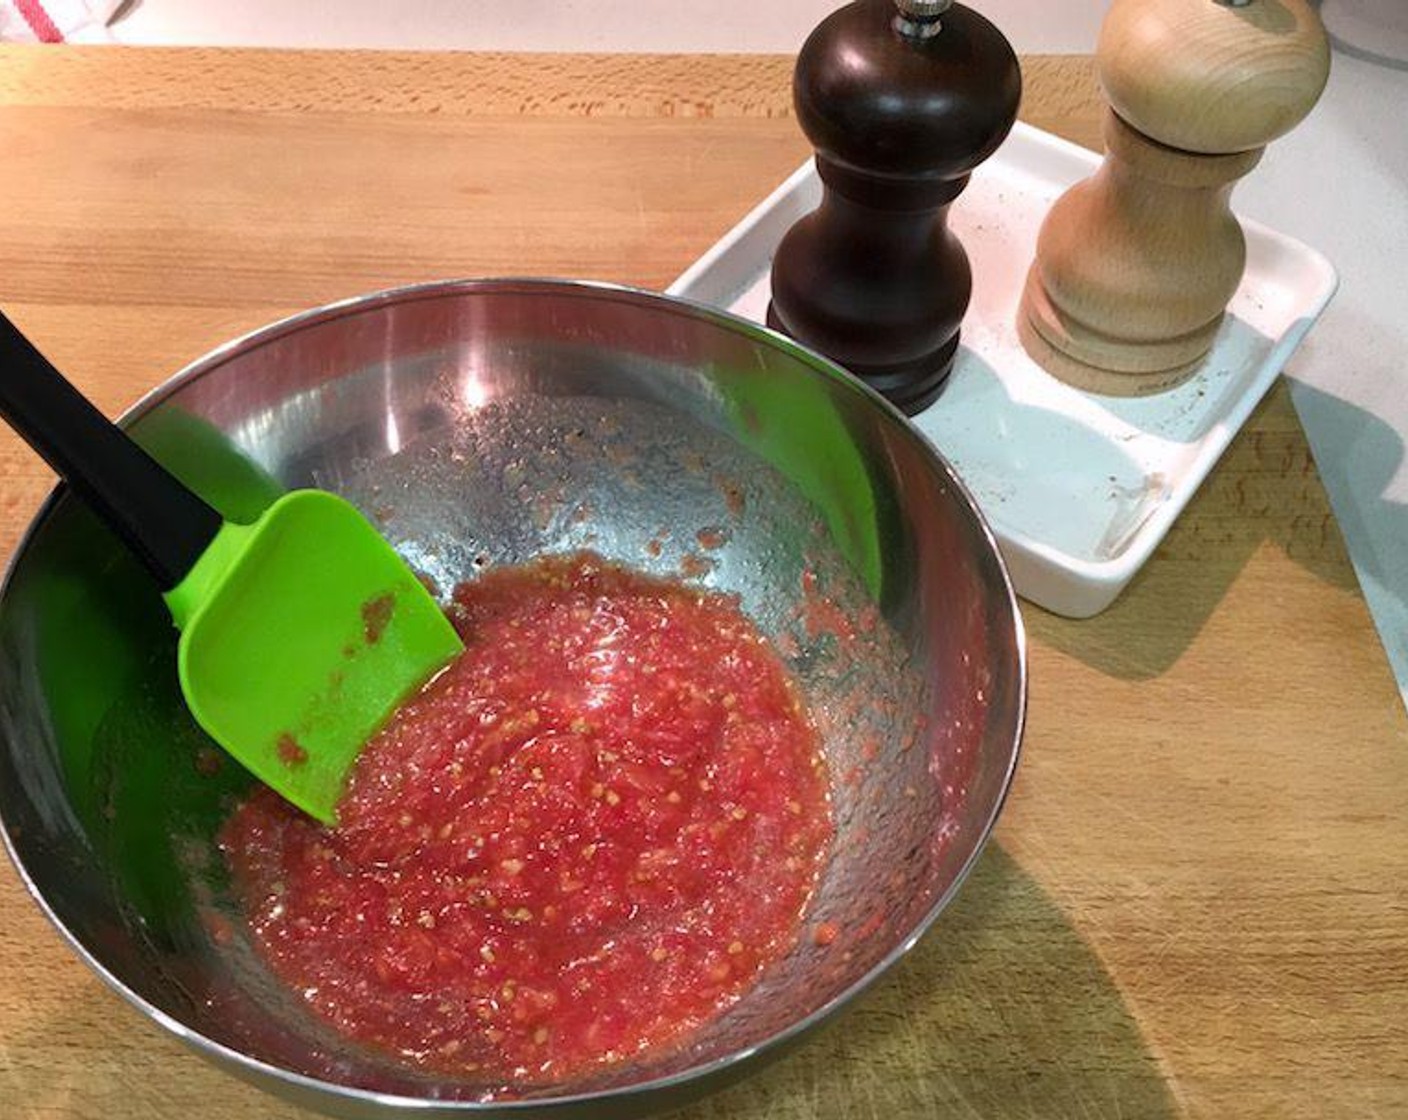 step 4 Season tomato pulp with Extra-Virgin Olive Oil (1 Tbsp), Crushed Red Pepper Flakes (1 dash), Salt (to taste), and Ground Black Pepper (to taste).